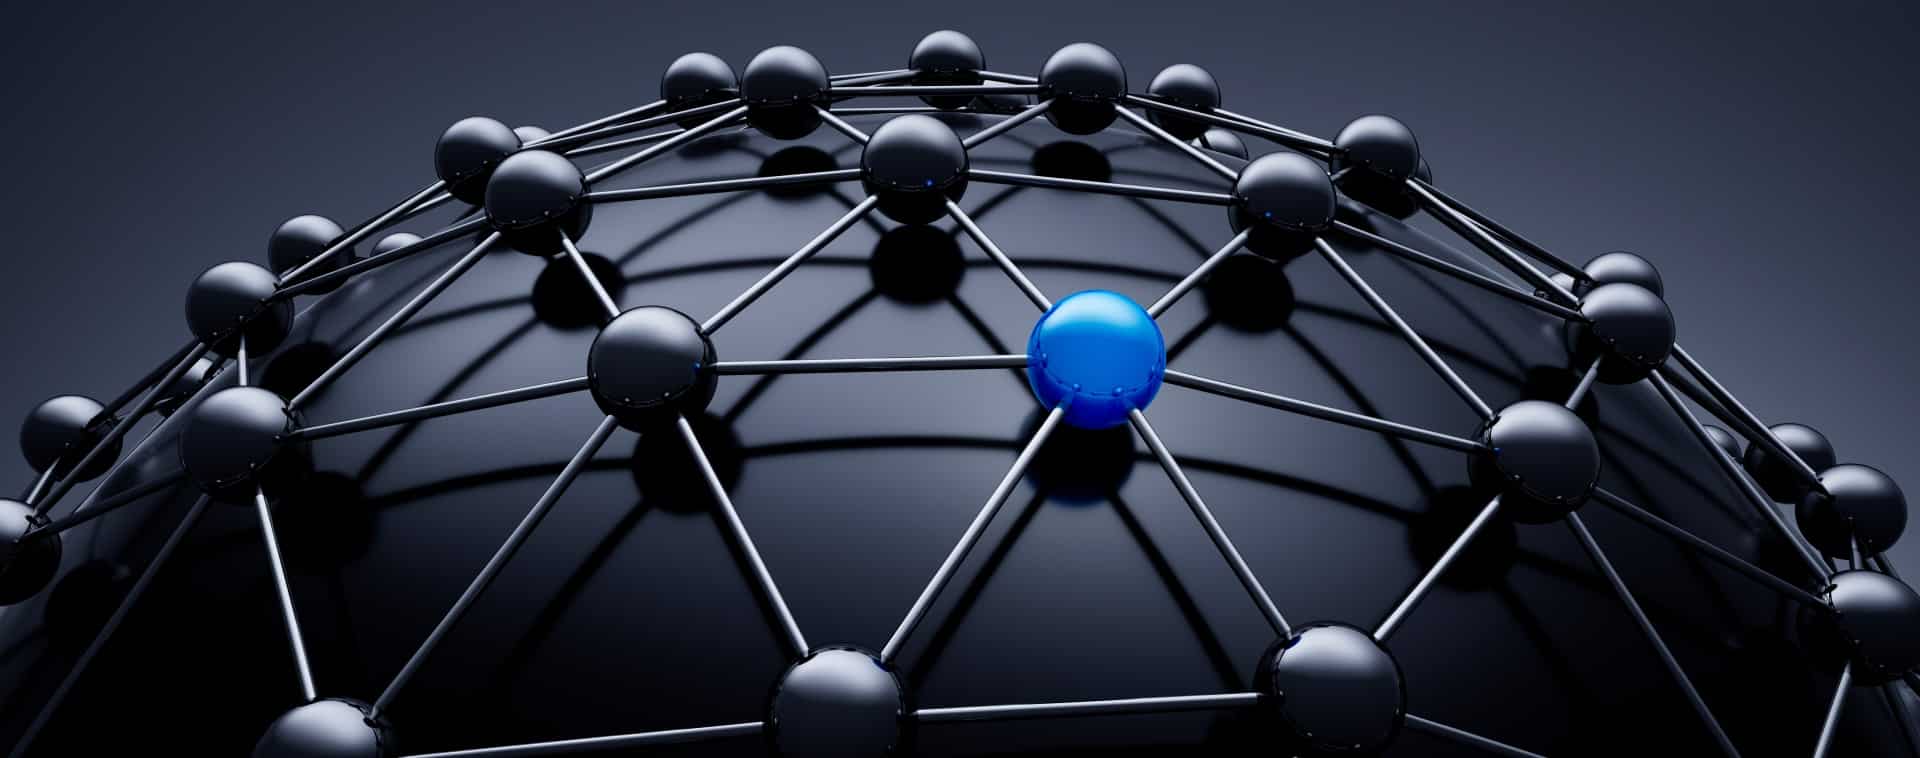 Net of black balls covering sphere, with one blue ball being highlighted, representing backlinks to an advisors website.